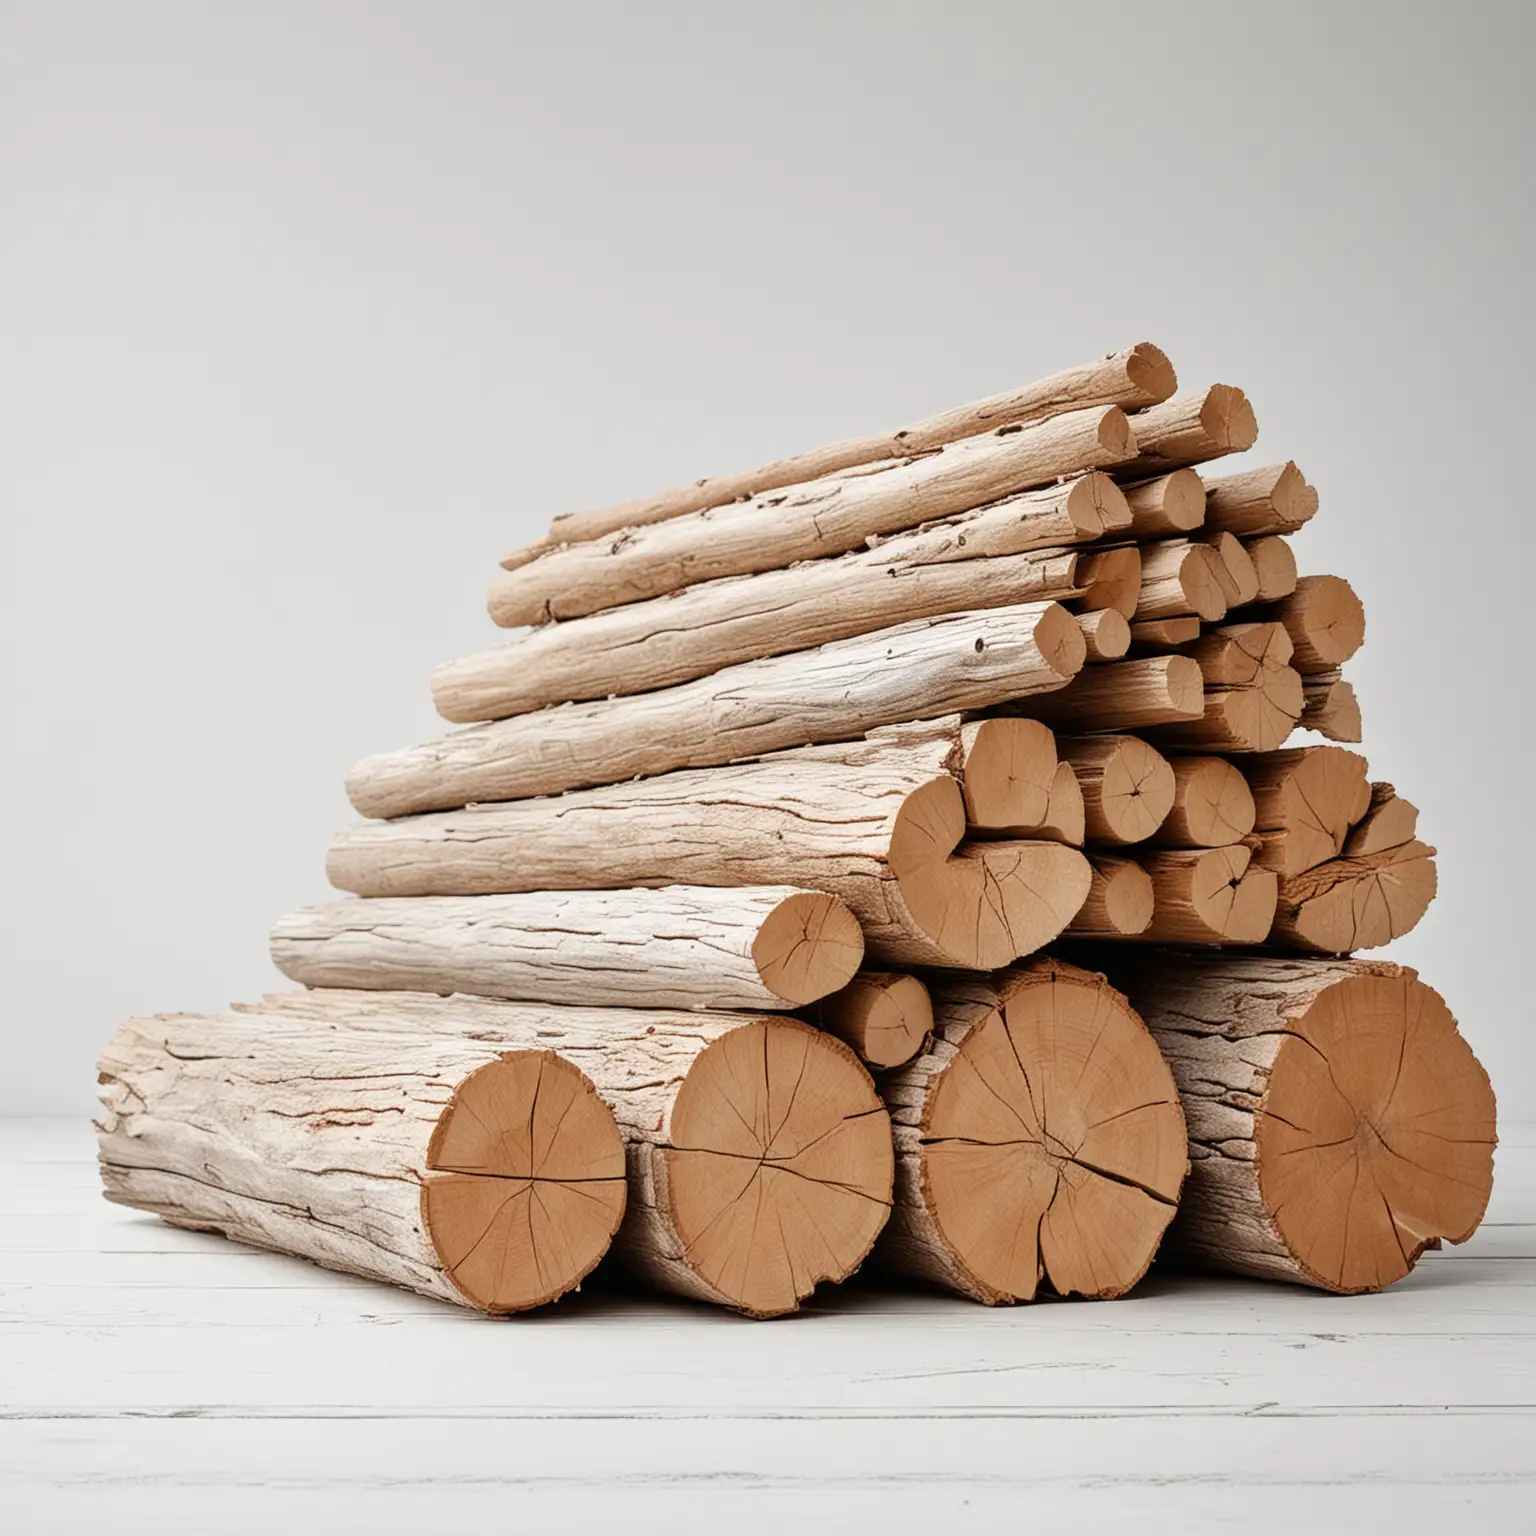 Stacked Wooden Logs on White Background